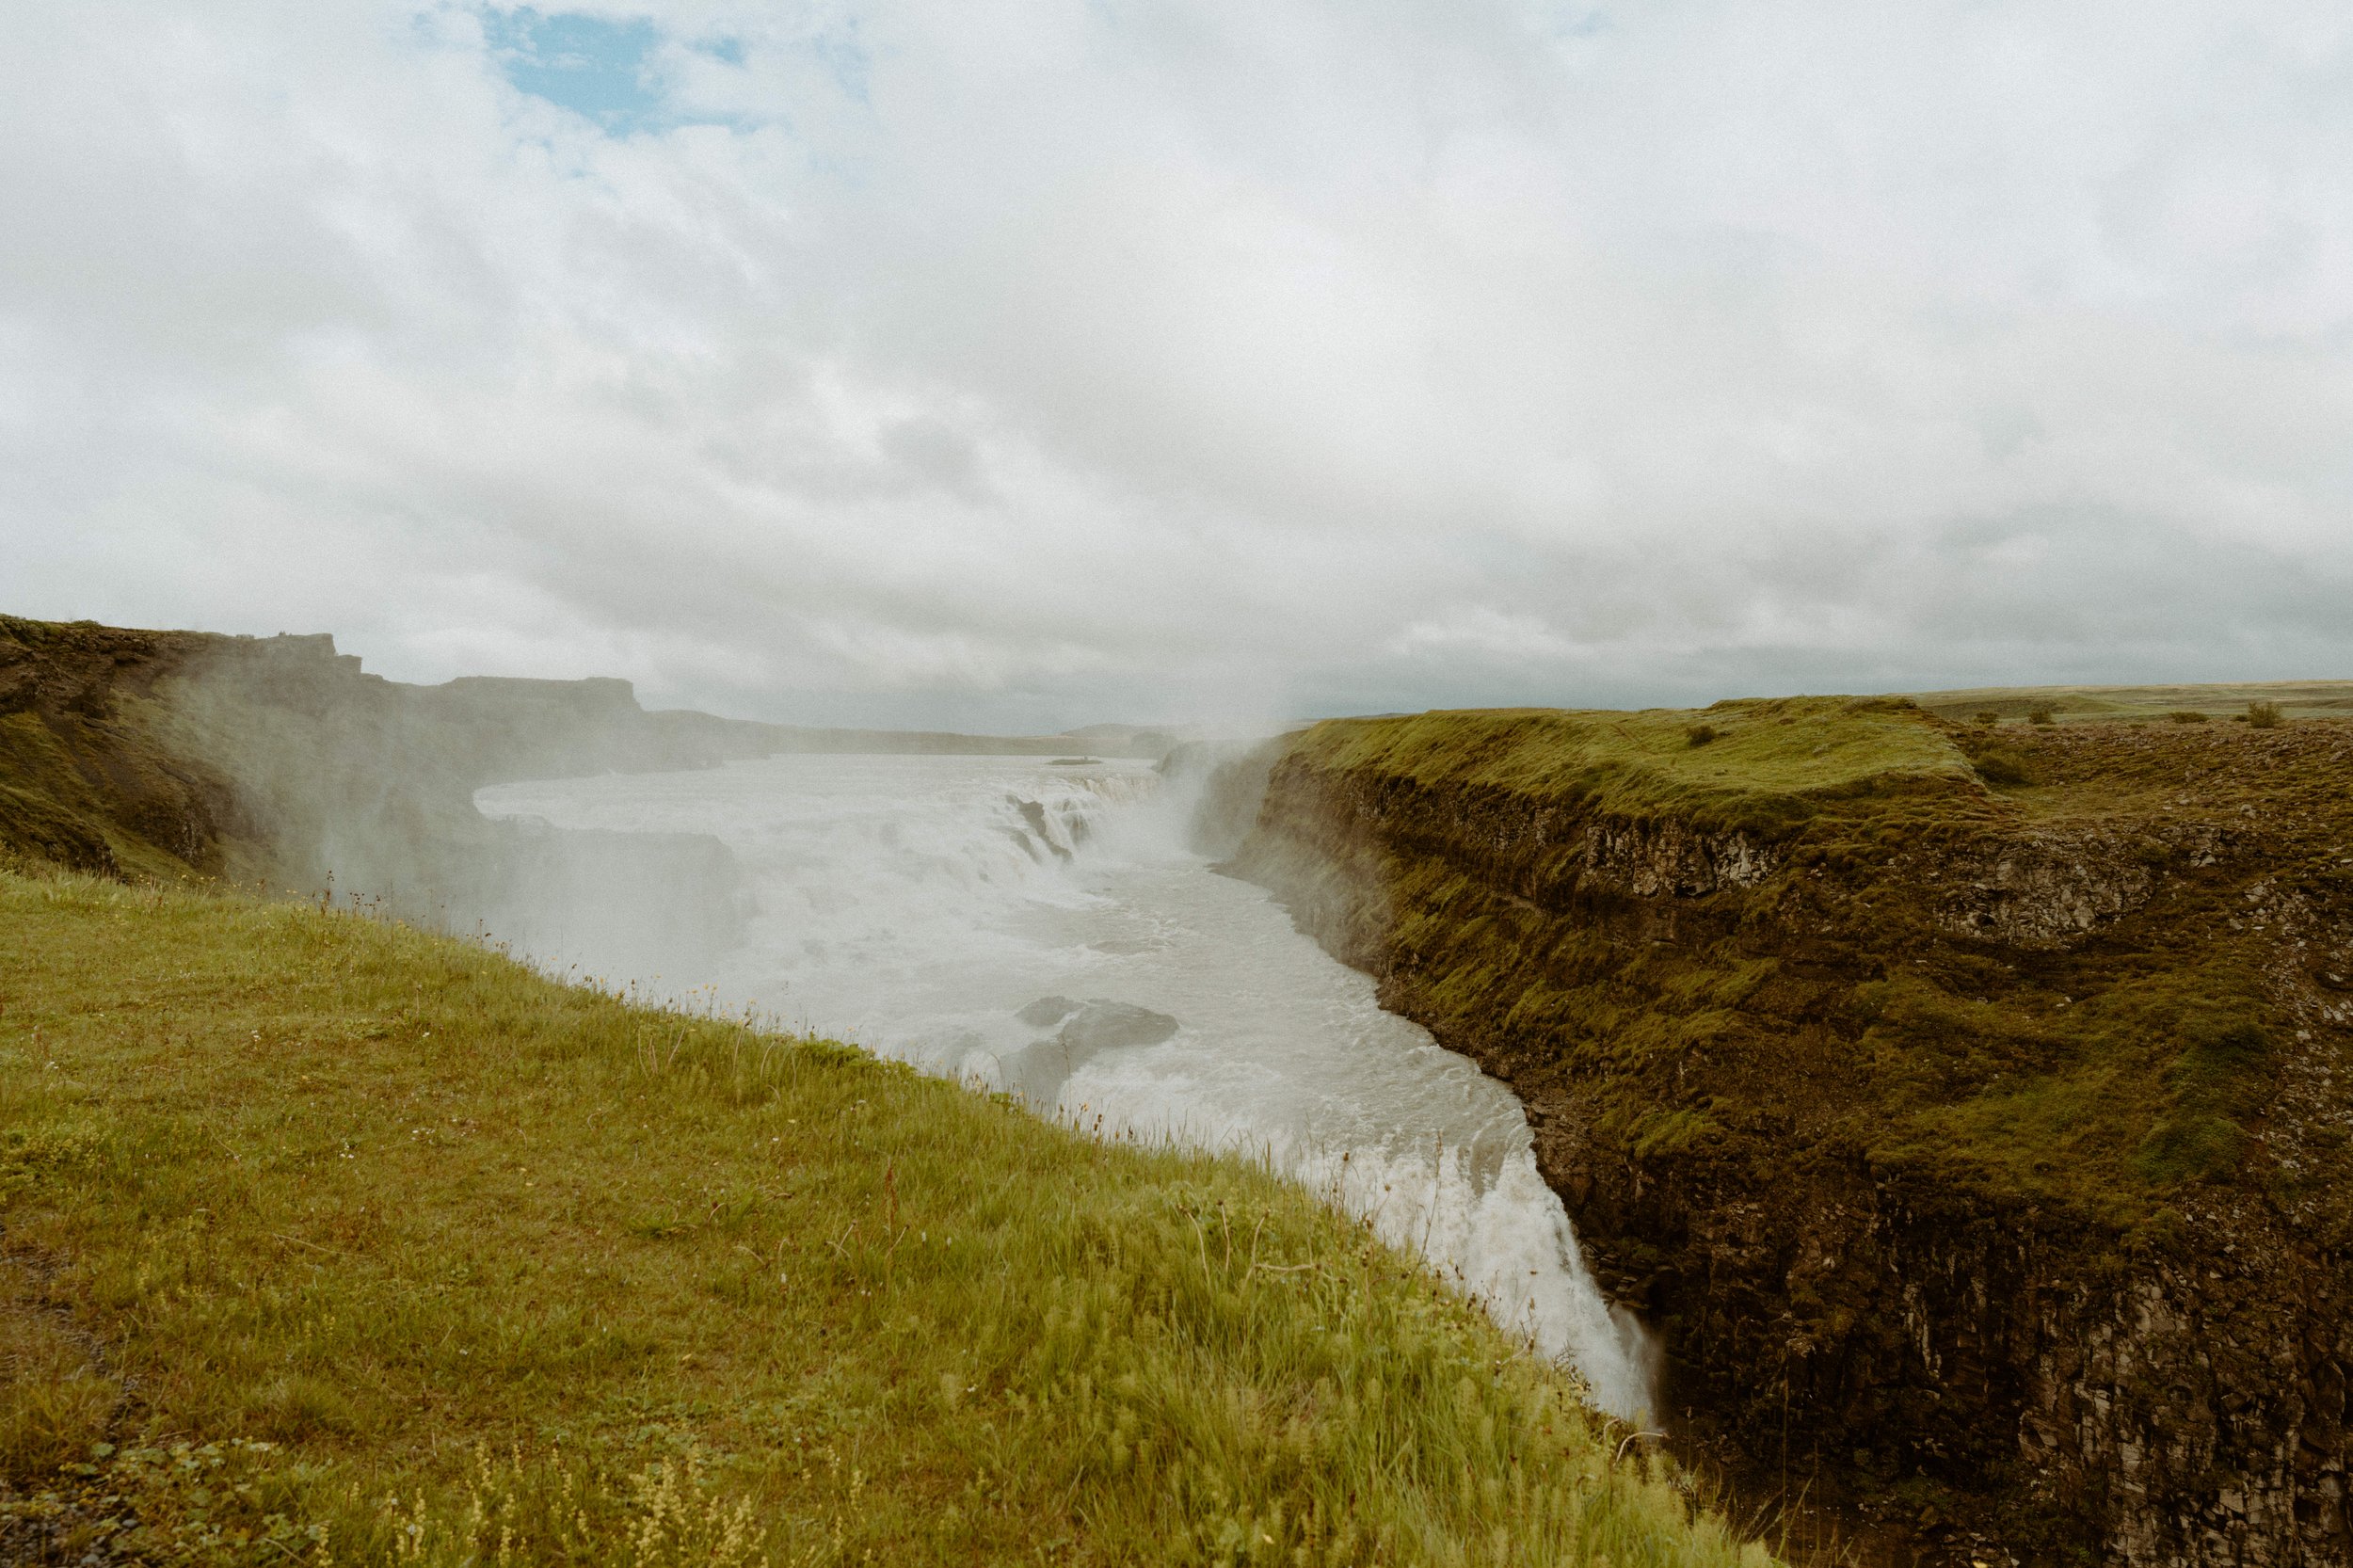 How to Elope in Iceland | Iceland Adventure Wedding Guide | Best Places to Elope | Destination Elopement Planning | Iceland Elopement Photographer